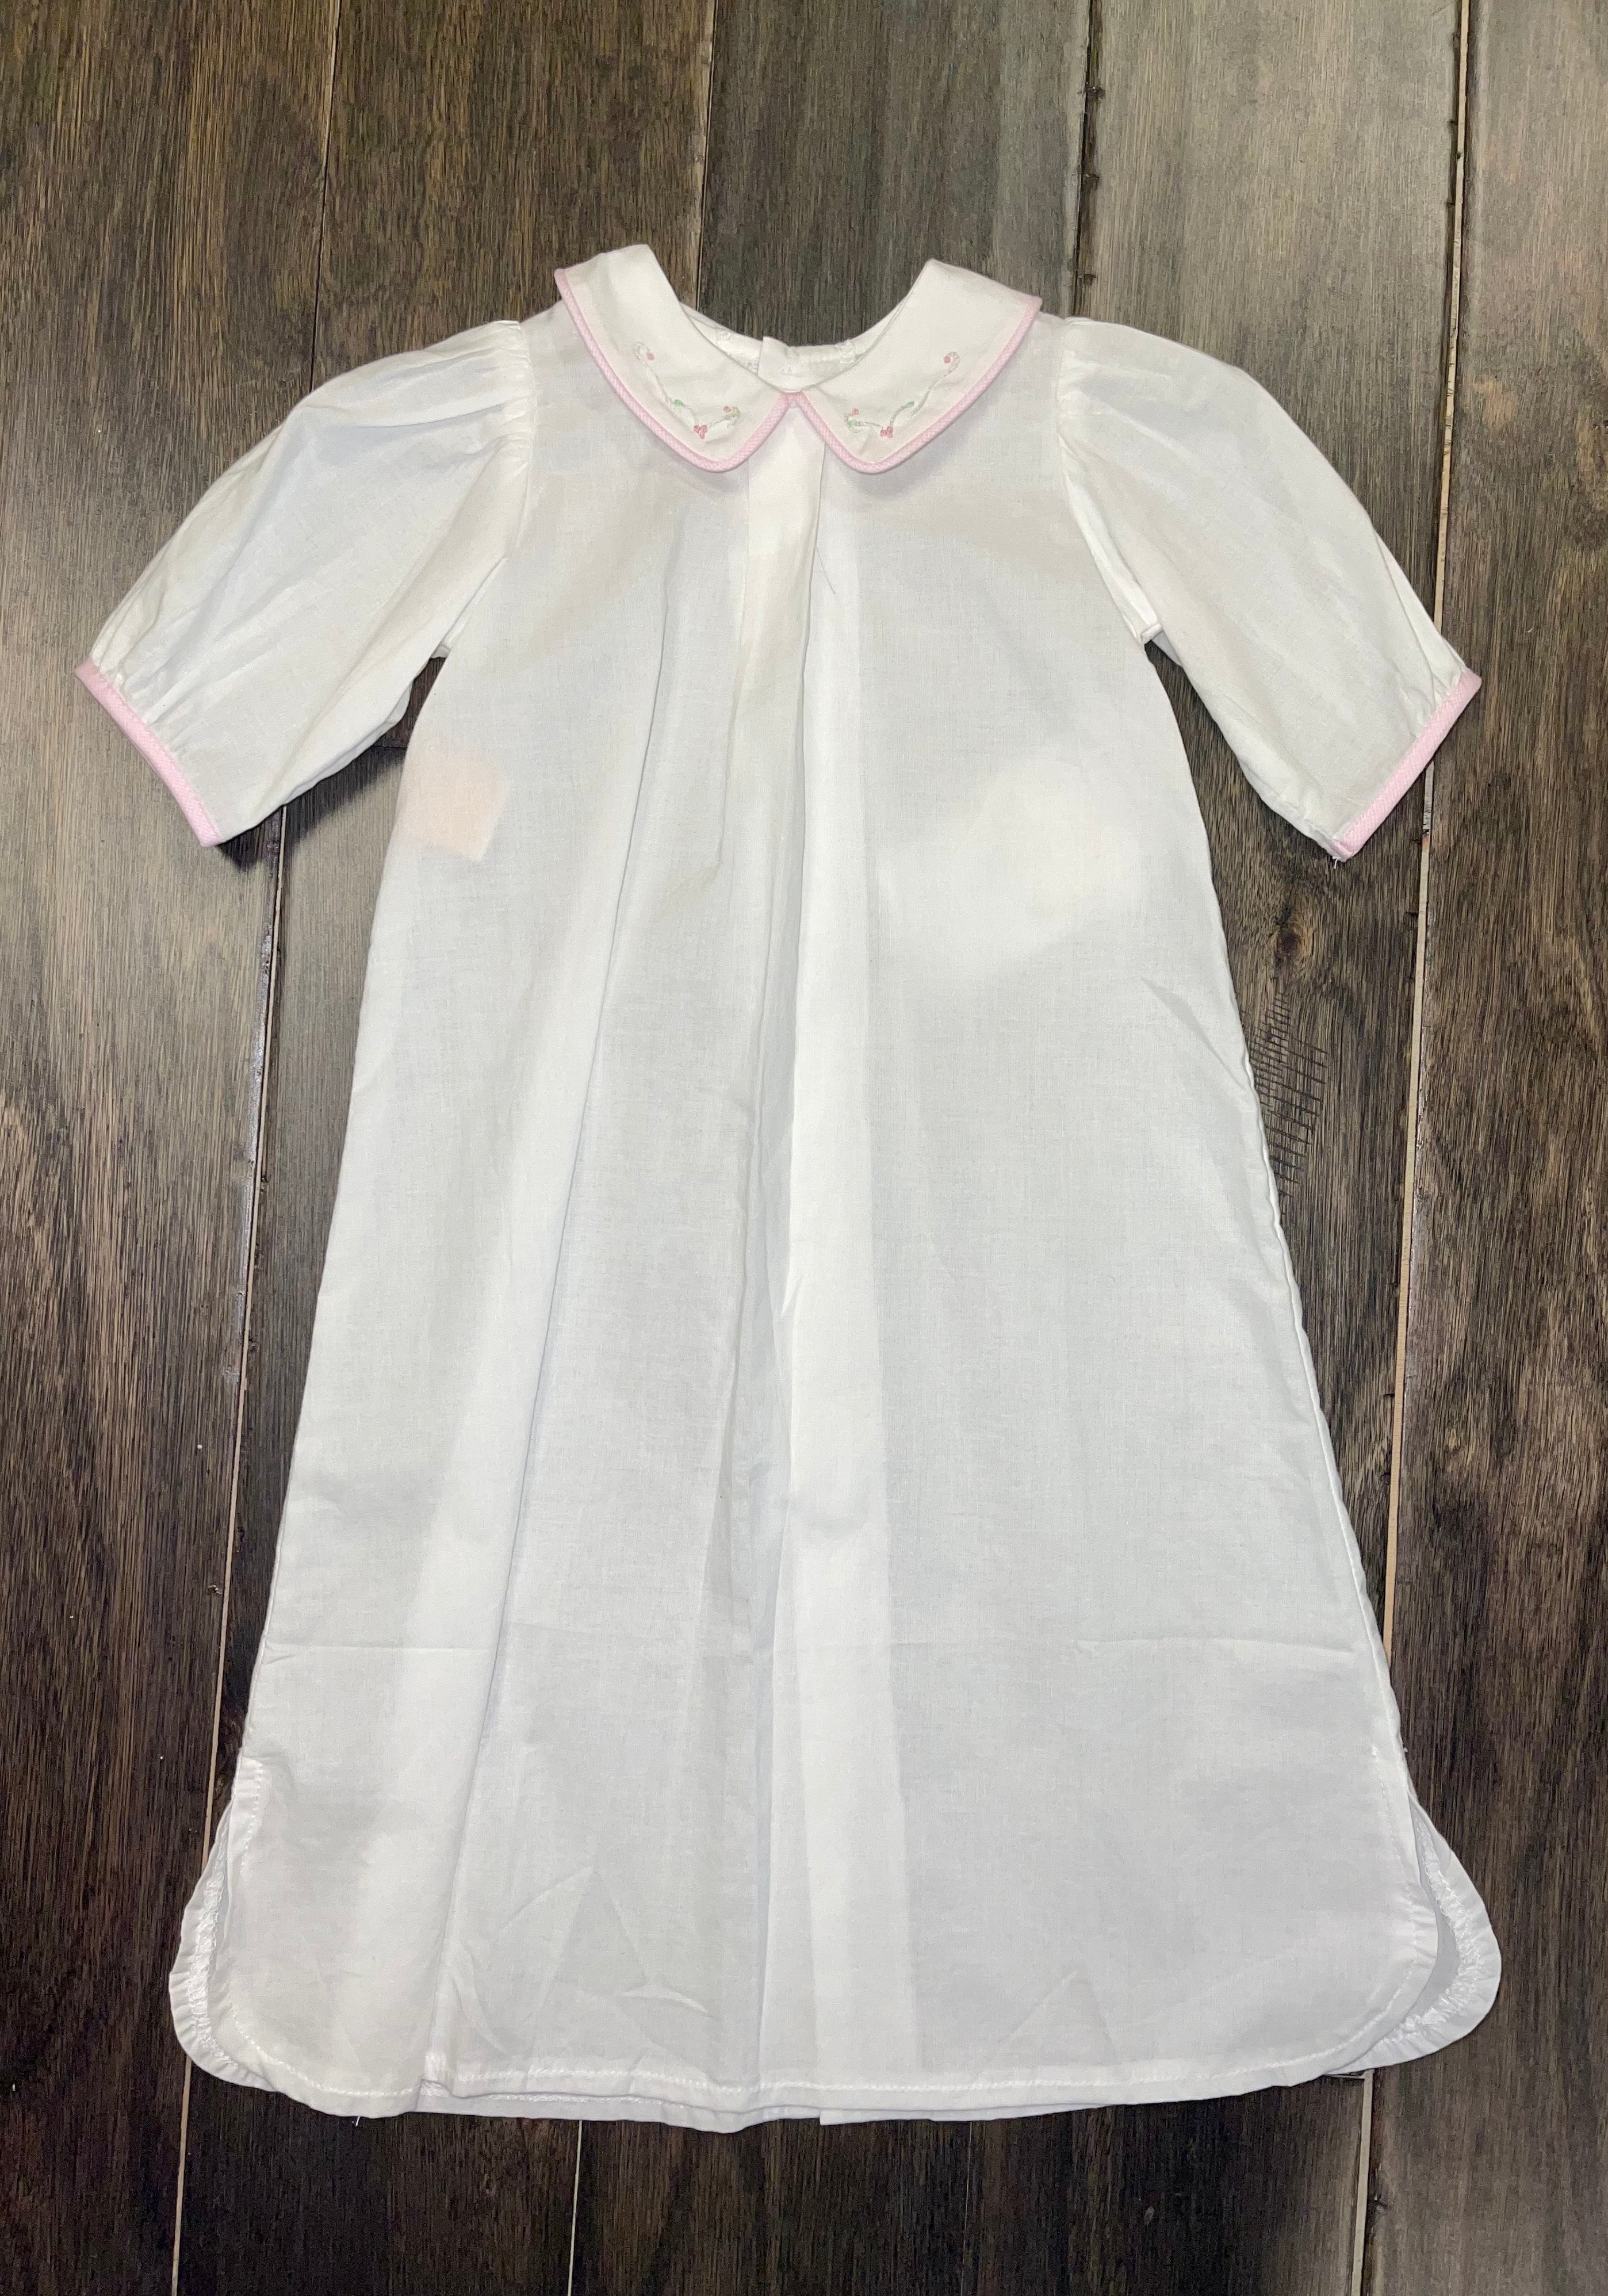 Pink Collared Christening Dress w/ flowers